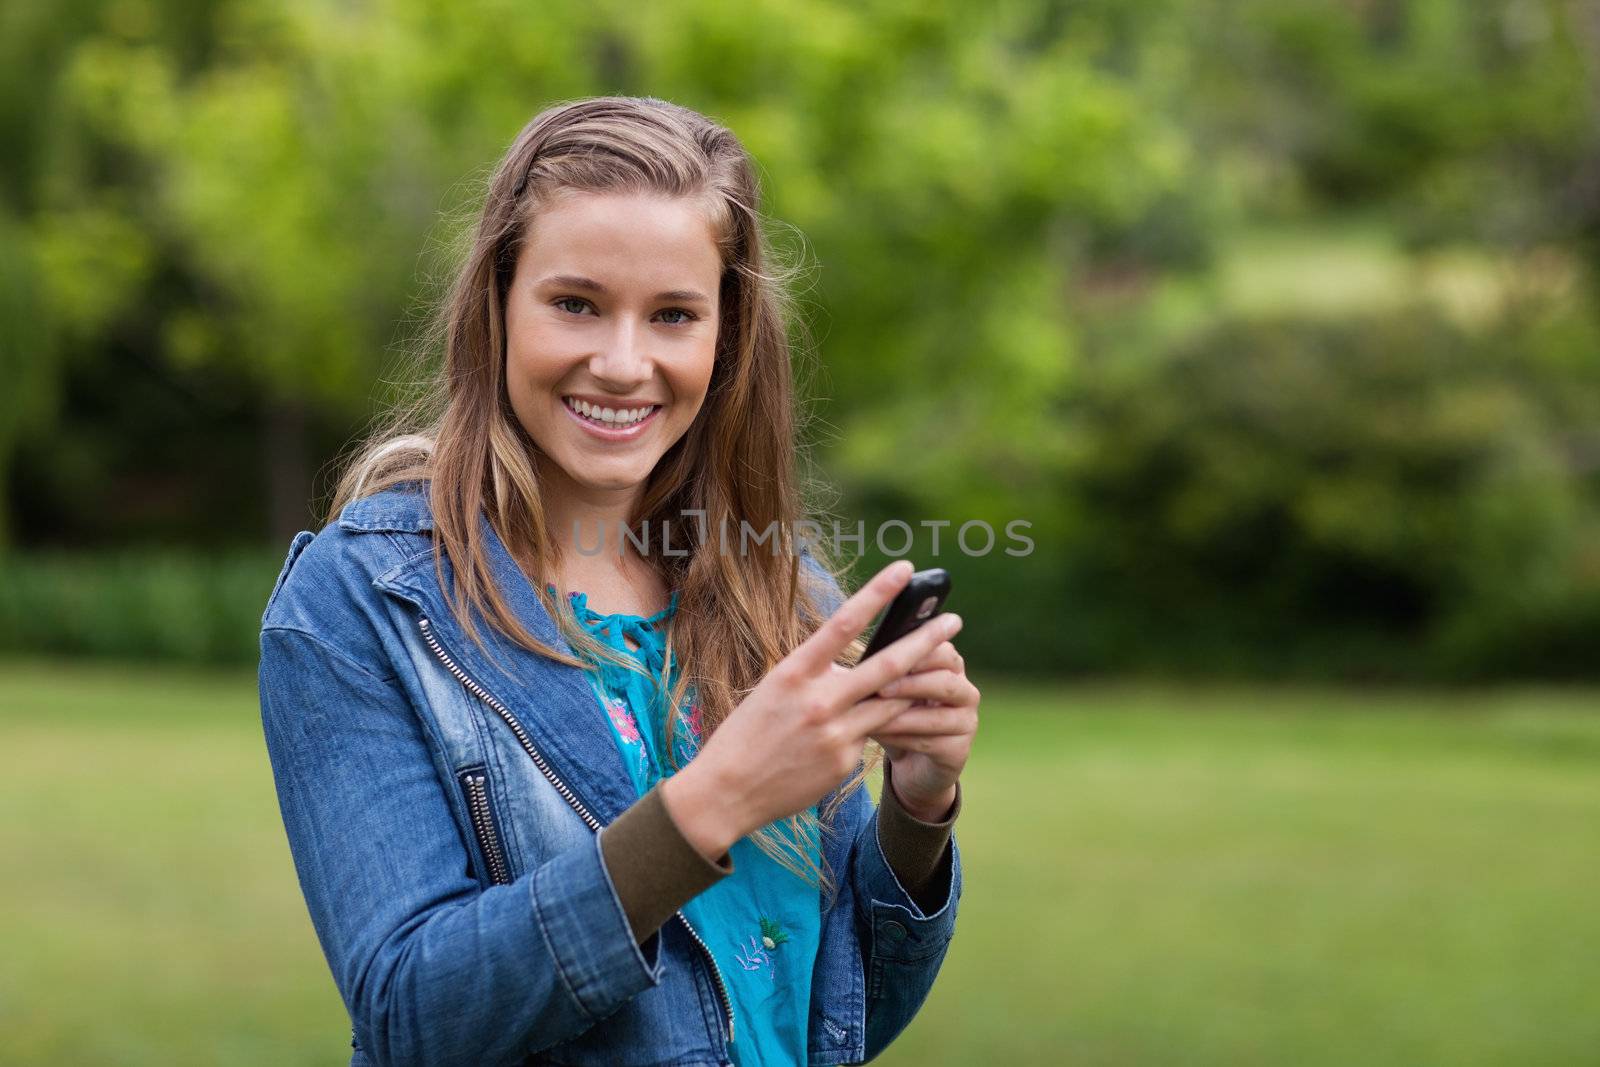 Smiling teenager sending a text with her cellphone